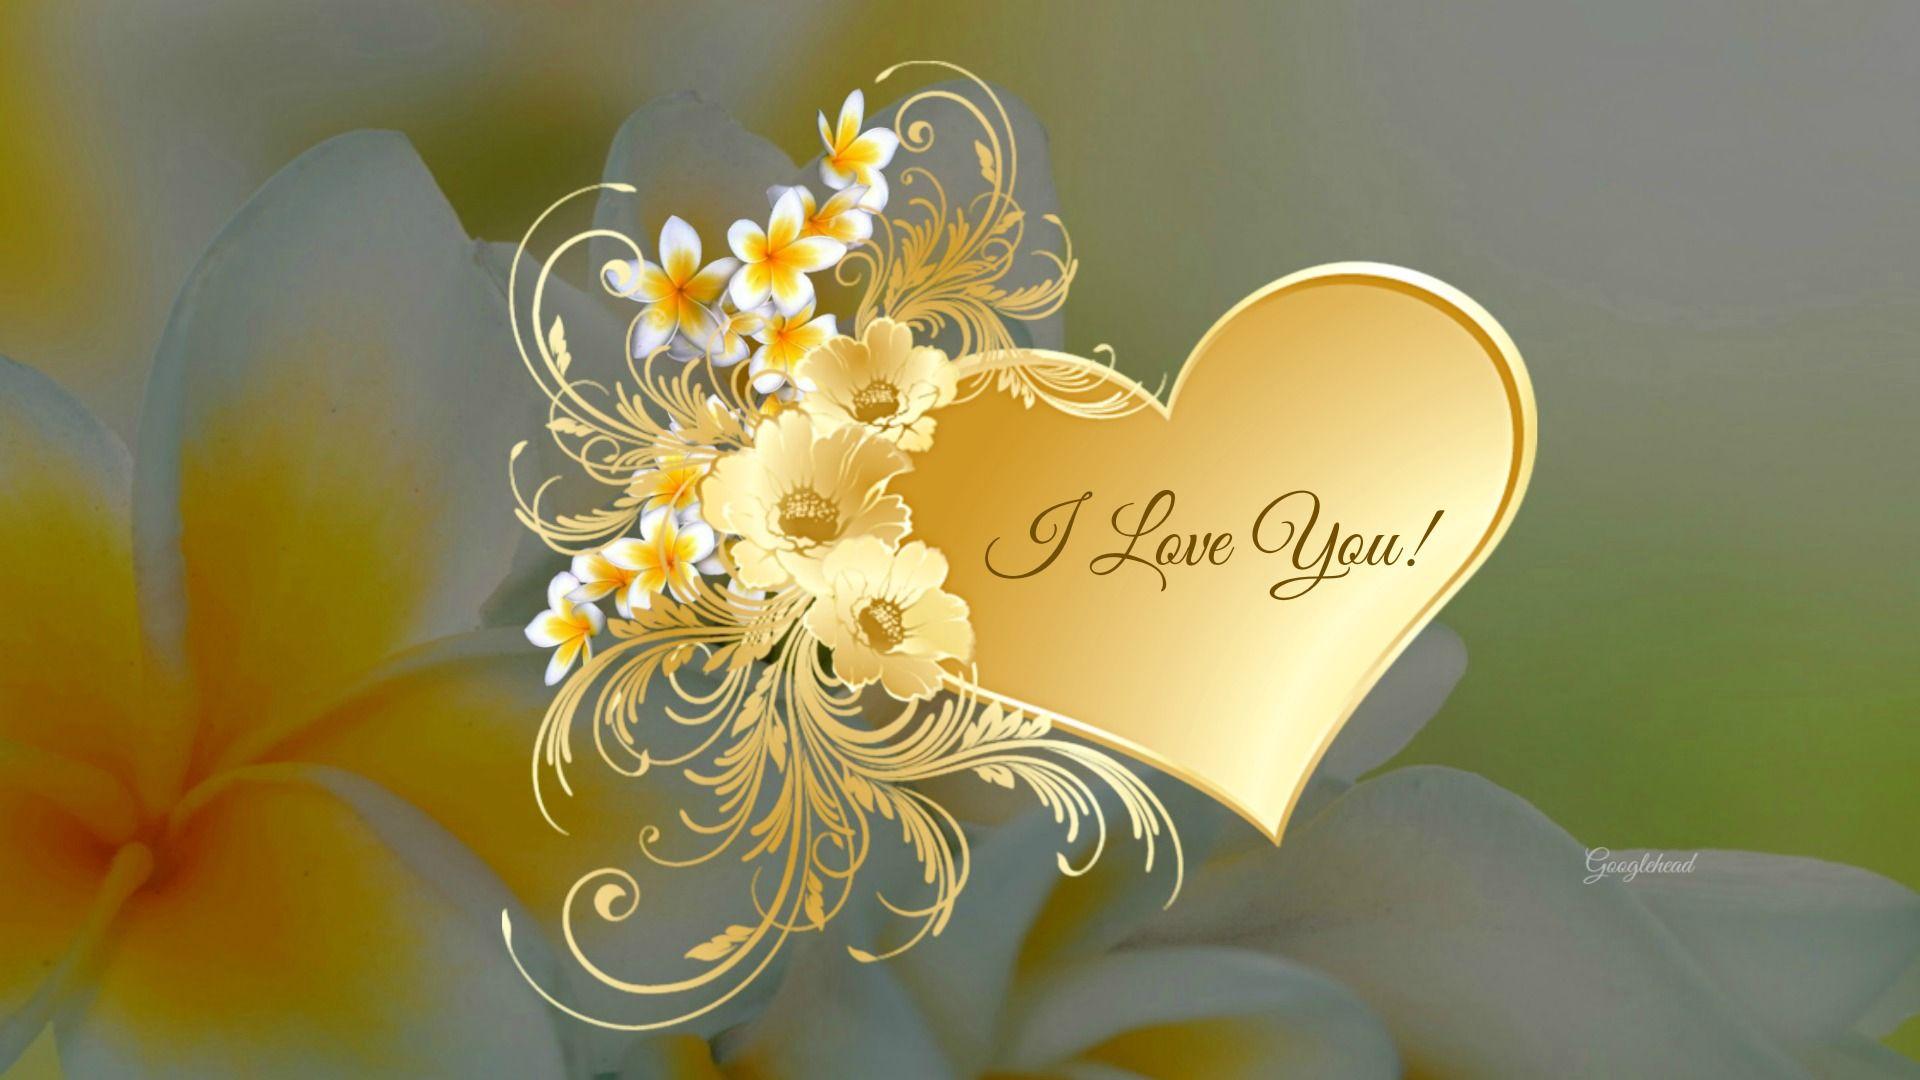 I Love You Live Wallpaper Android Apps on Google Play. HD